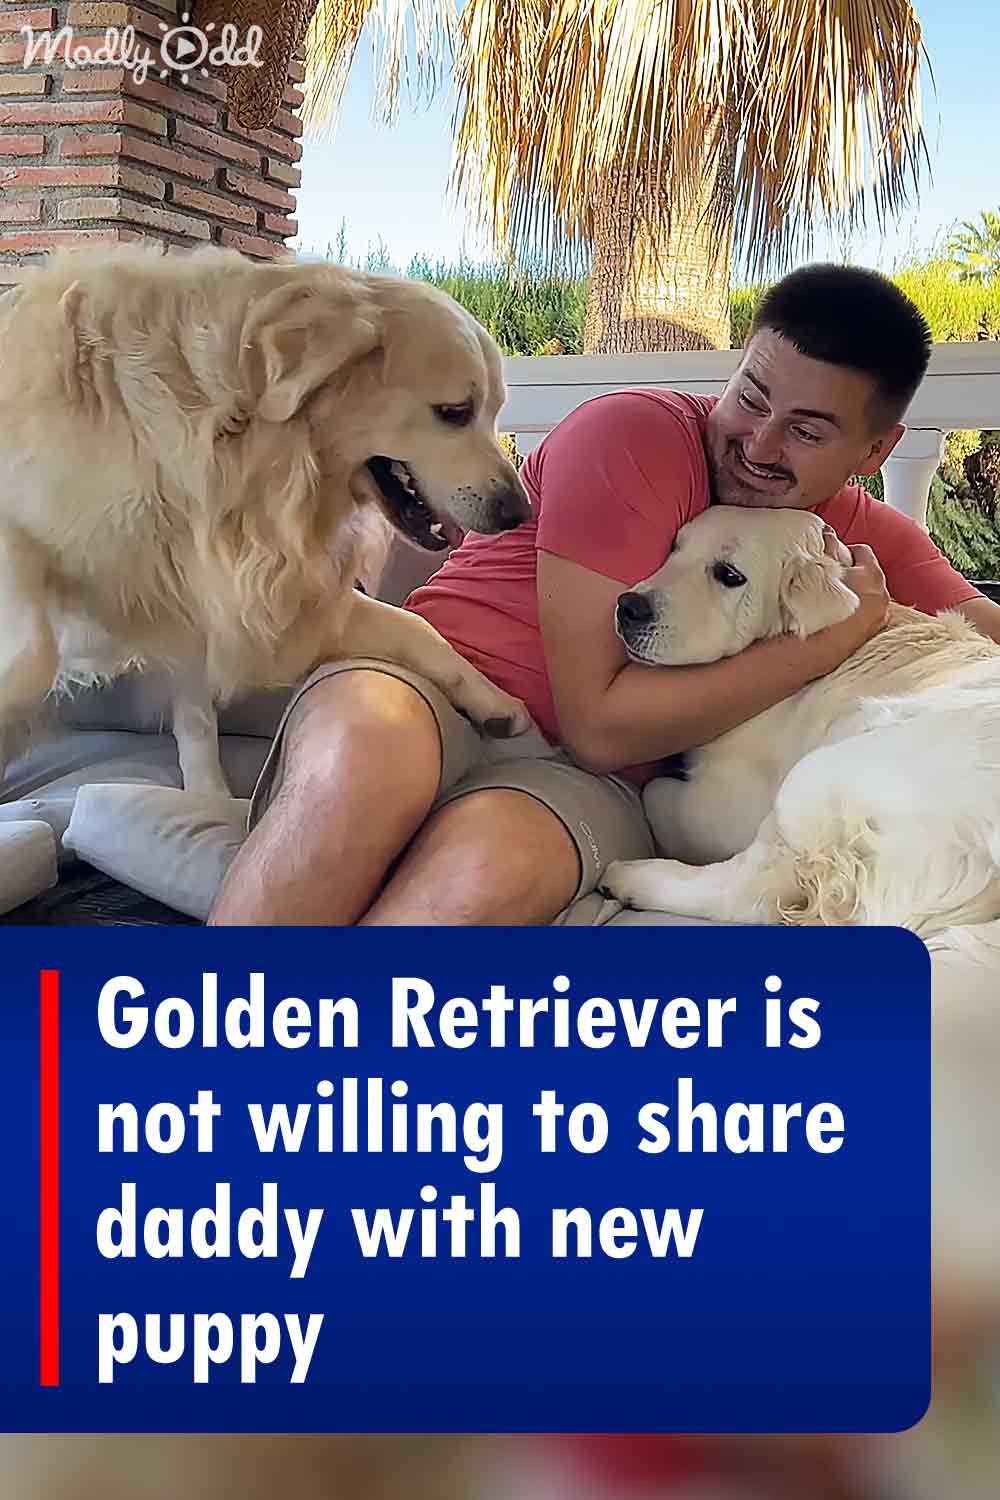 Golden Retriever is not willing to share daddy with new puppy